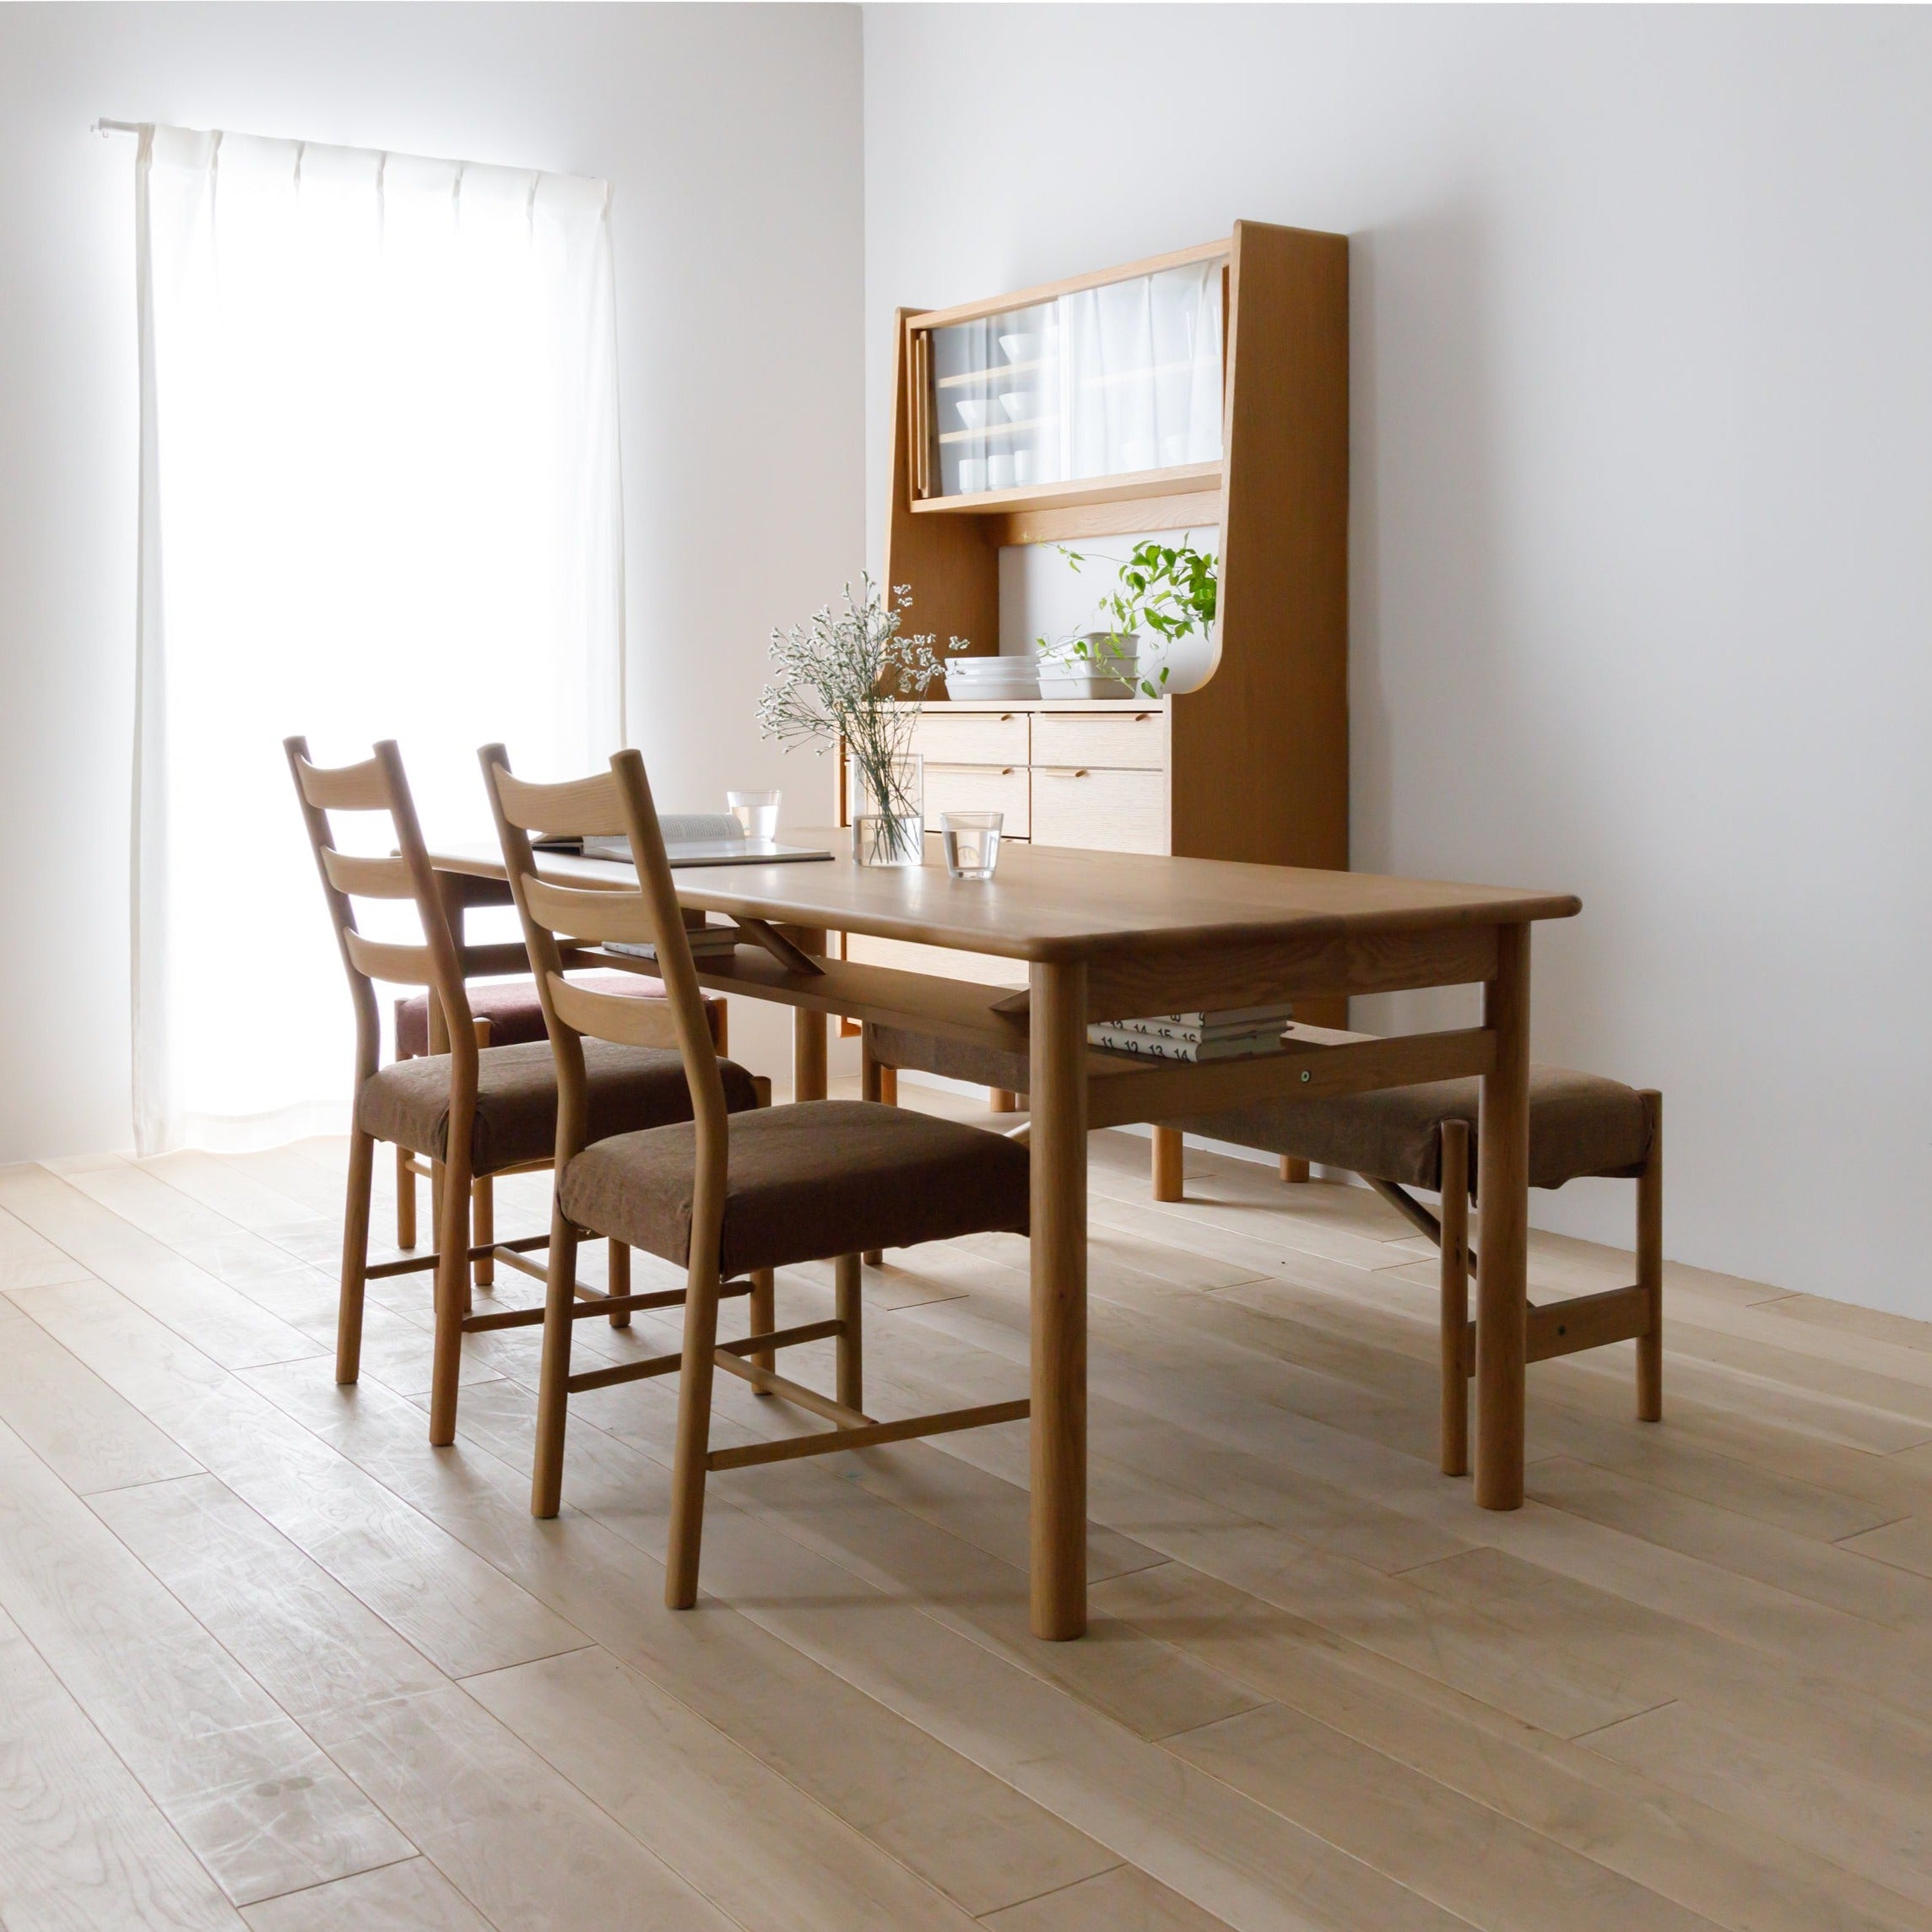 SALA - New Dining Table